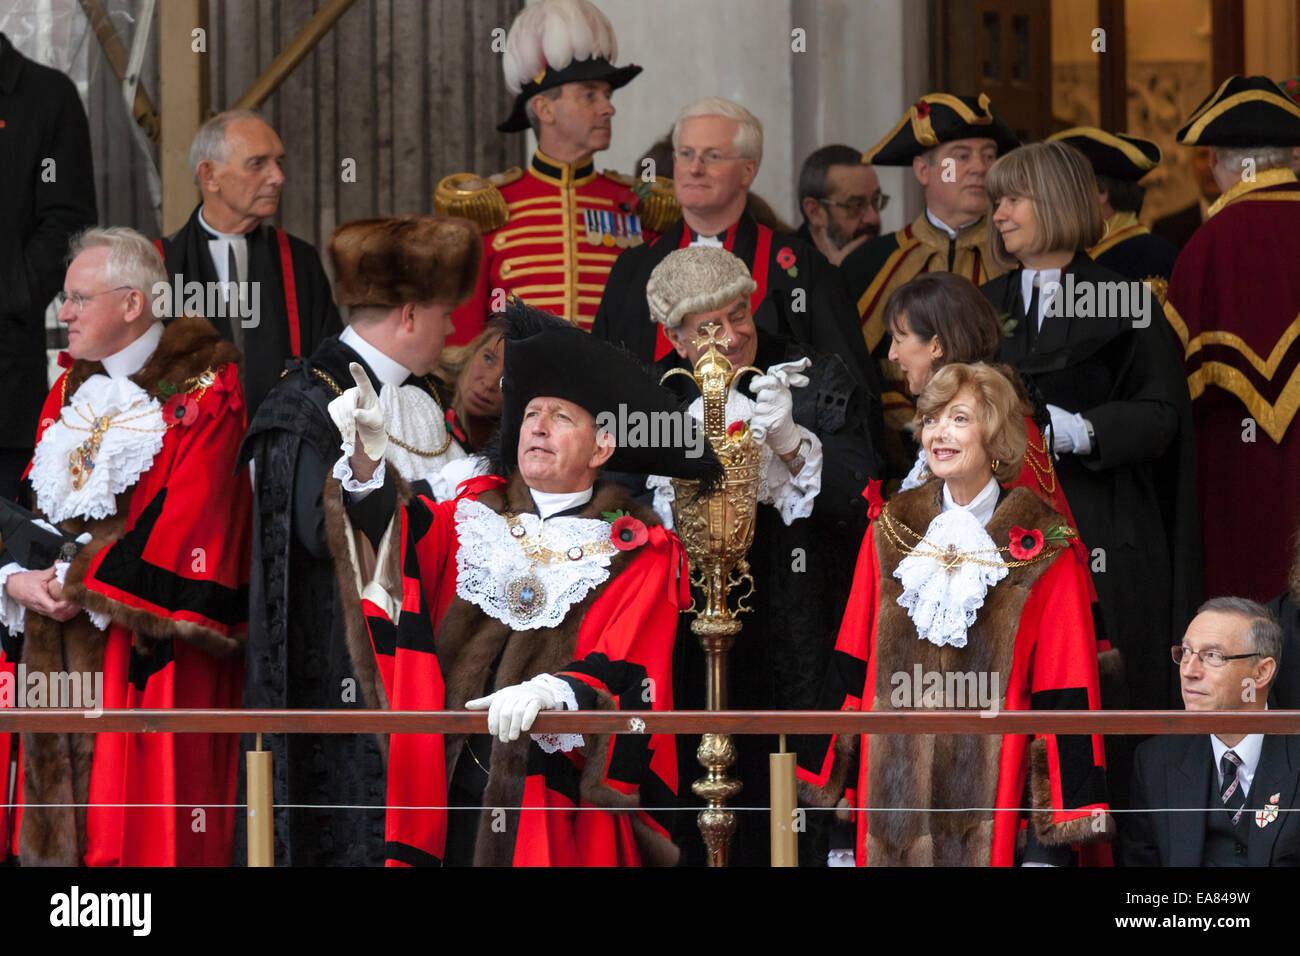 8th November 2014, Lord Mayor's Show, City of London, London, UK. The new 687th Lord Mayor, Alan Yarrow (front middle), watches the procession from Mansion House balcony. The outgoing mayor, Fiona Woolf, CBE stands to his right. The Lord Mayor's Show is the oldest civil processsion in the world, it celebrates the start of a one-year term for the new Mayor of the city of London Stock Photo